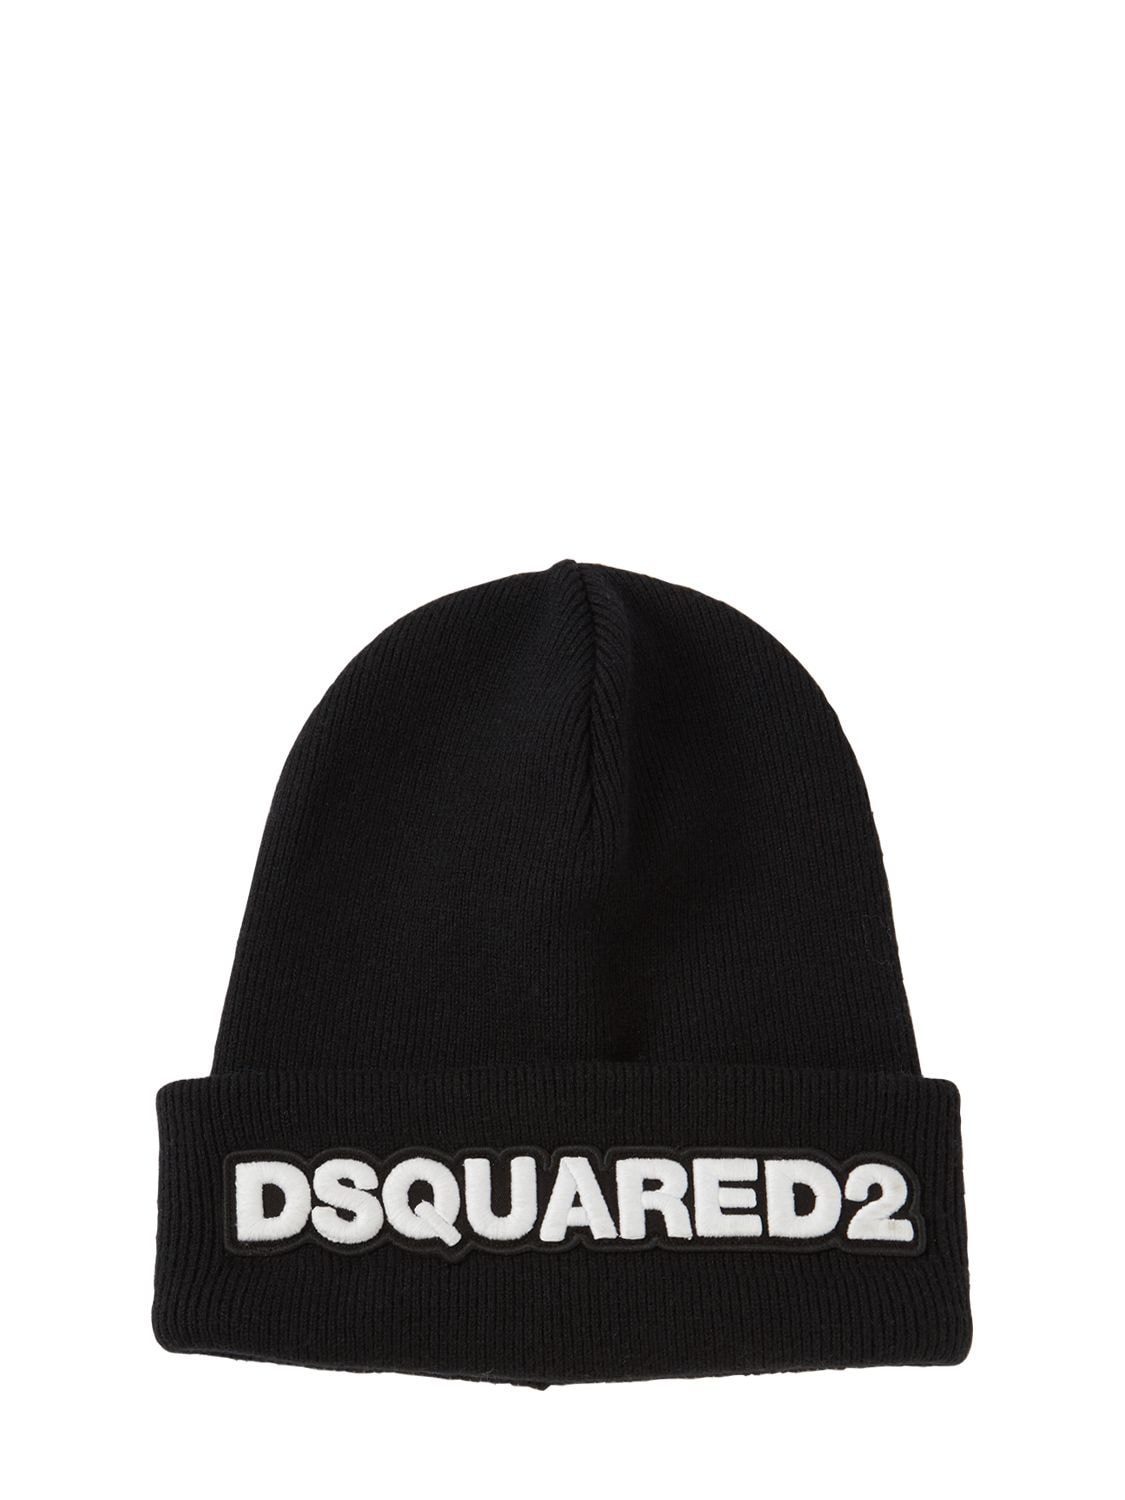 DSQUARED2 LOGO PATCH KNIT BEANIE HAT